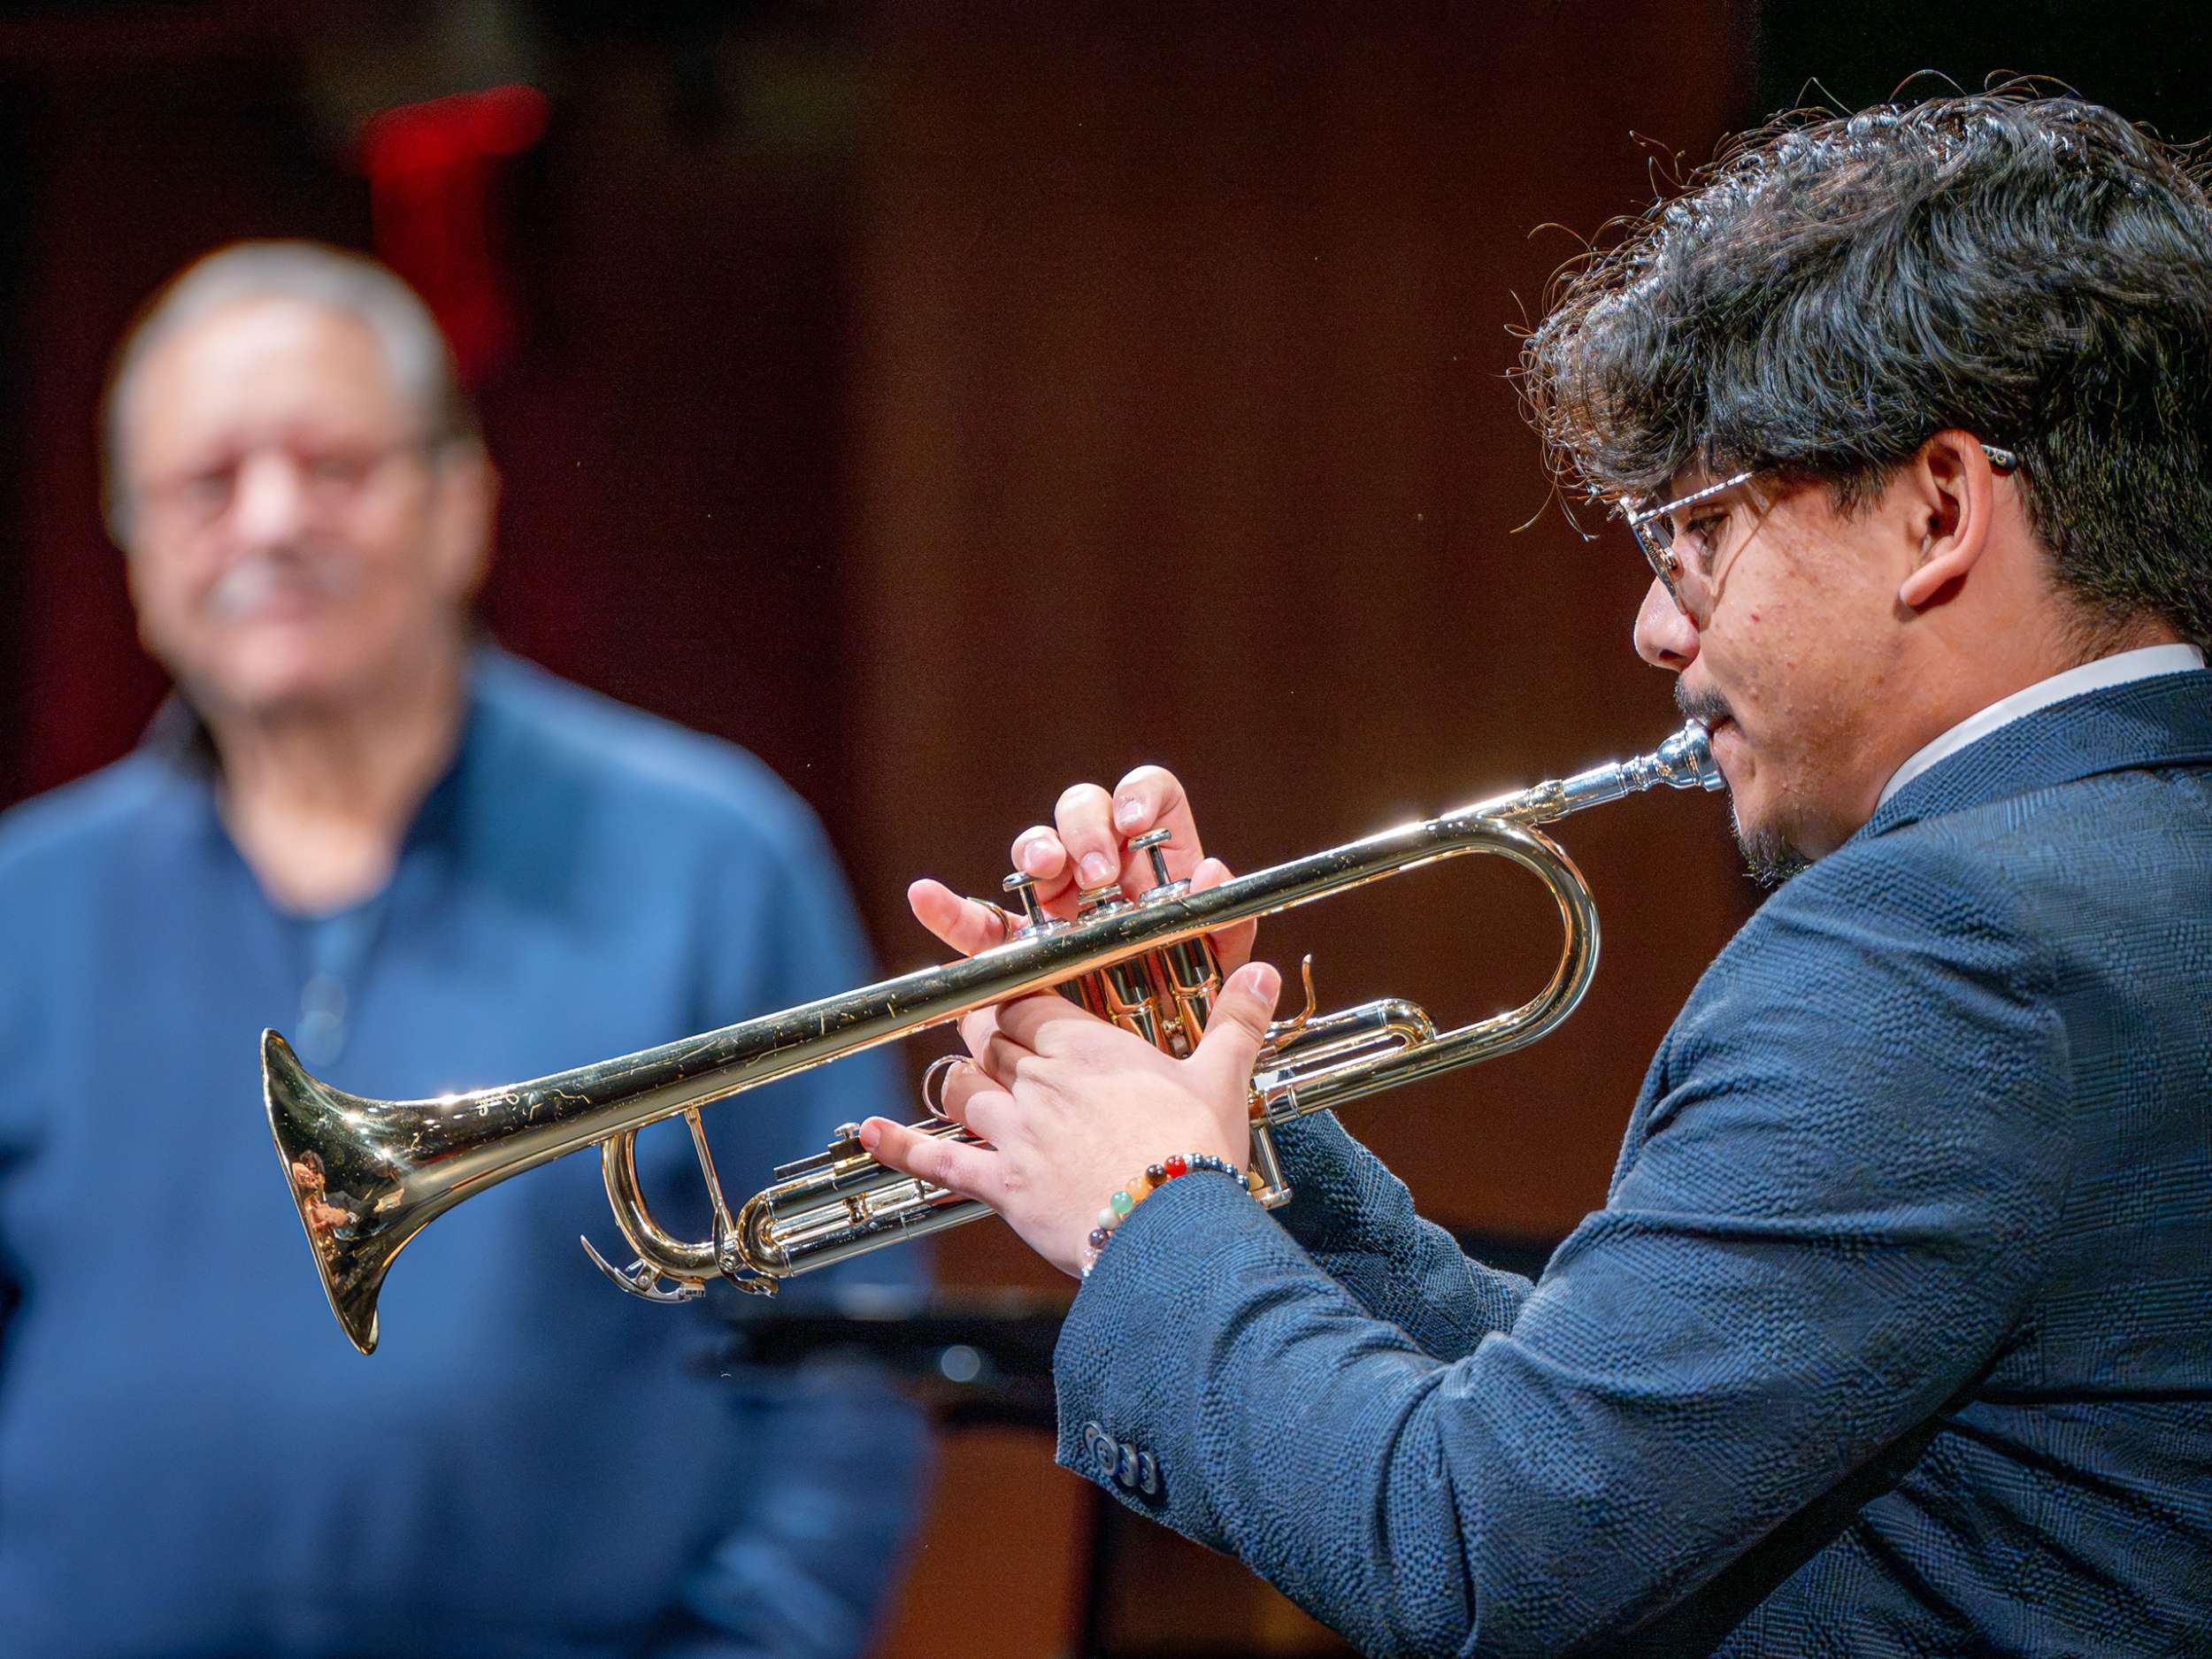 A student plays trumpet for Arturo Sandoval, who smiles in the background.